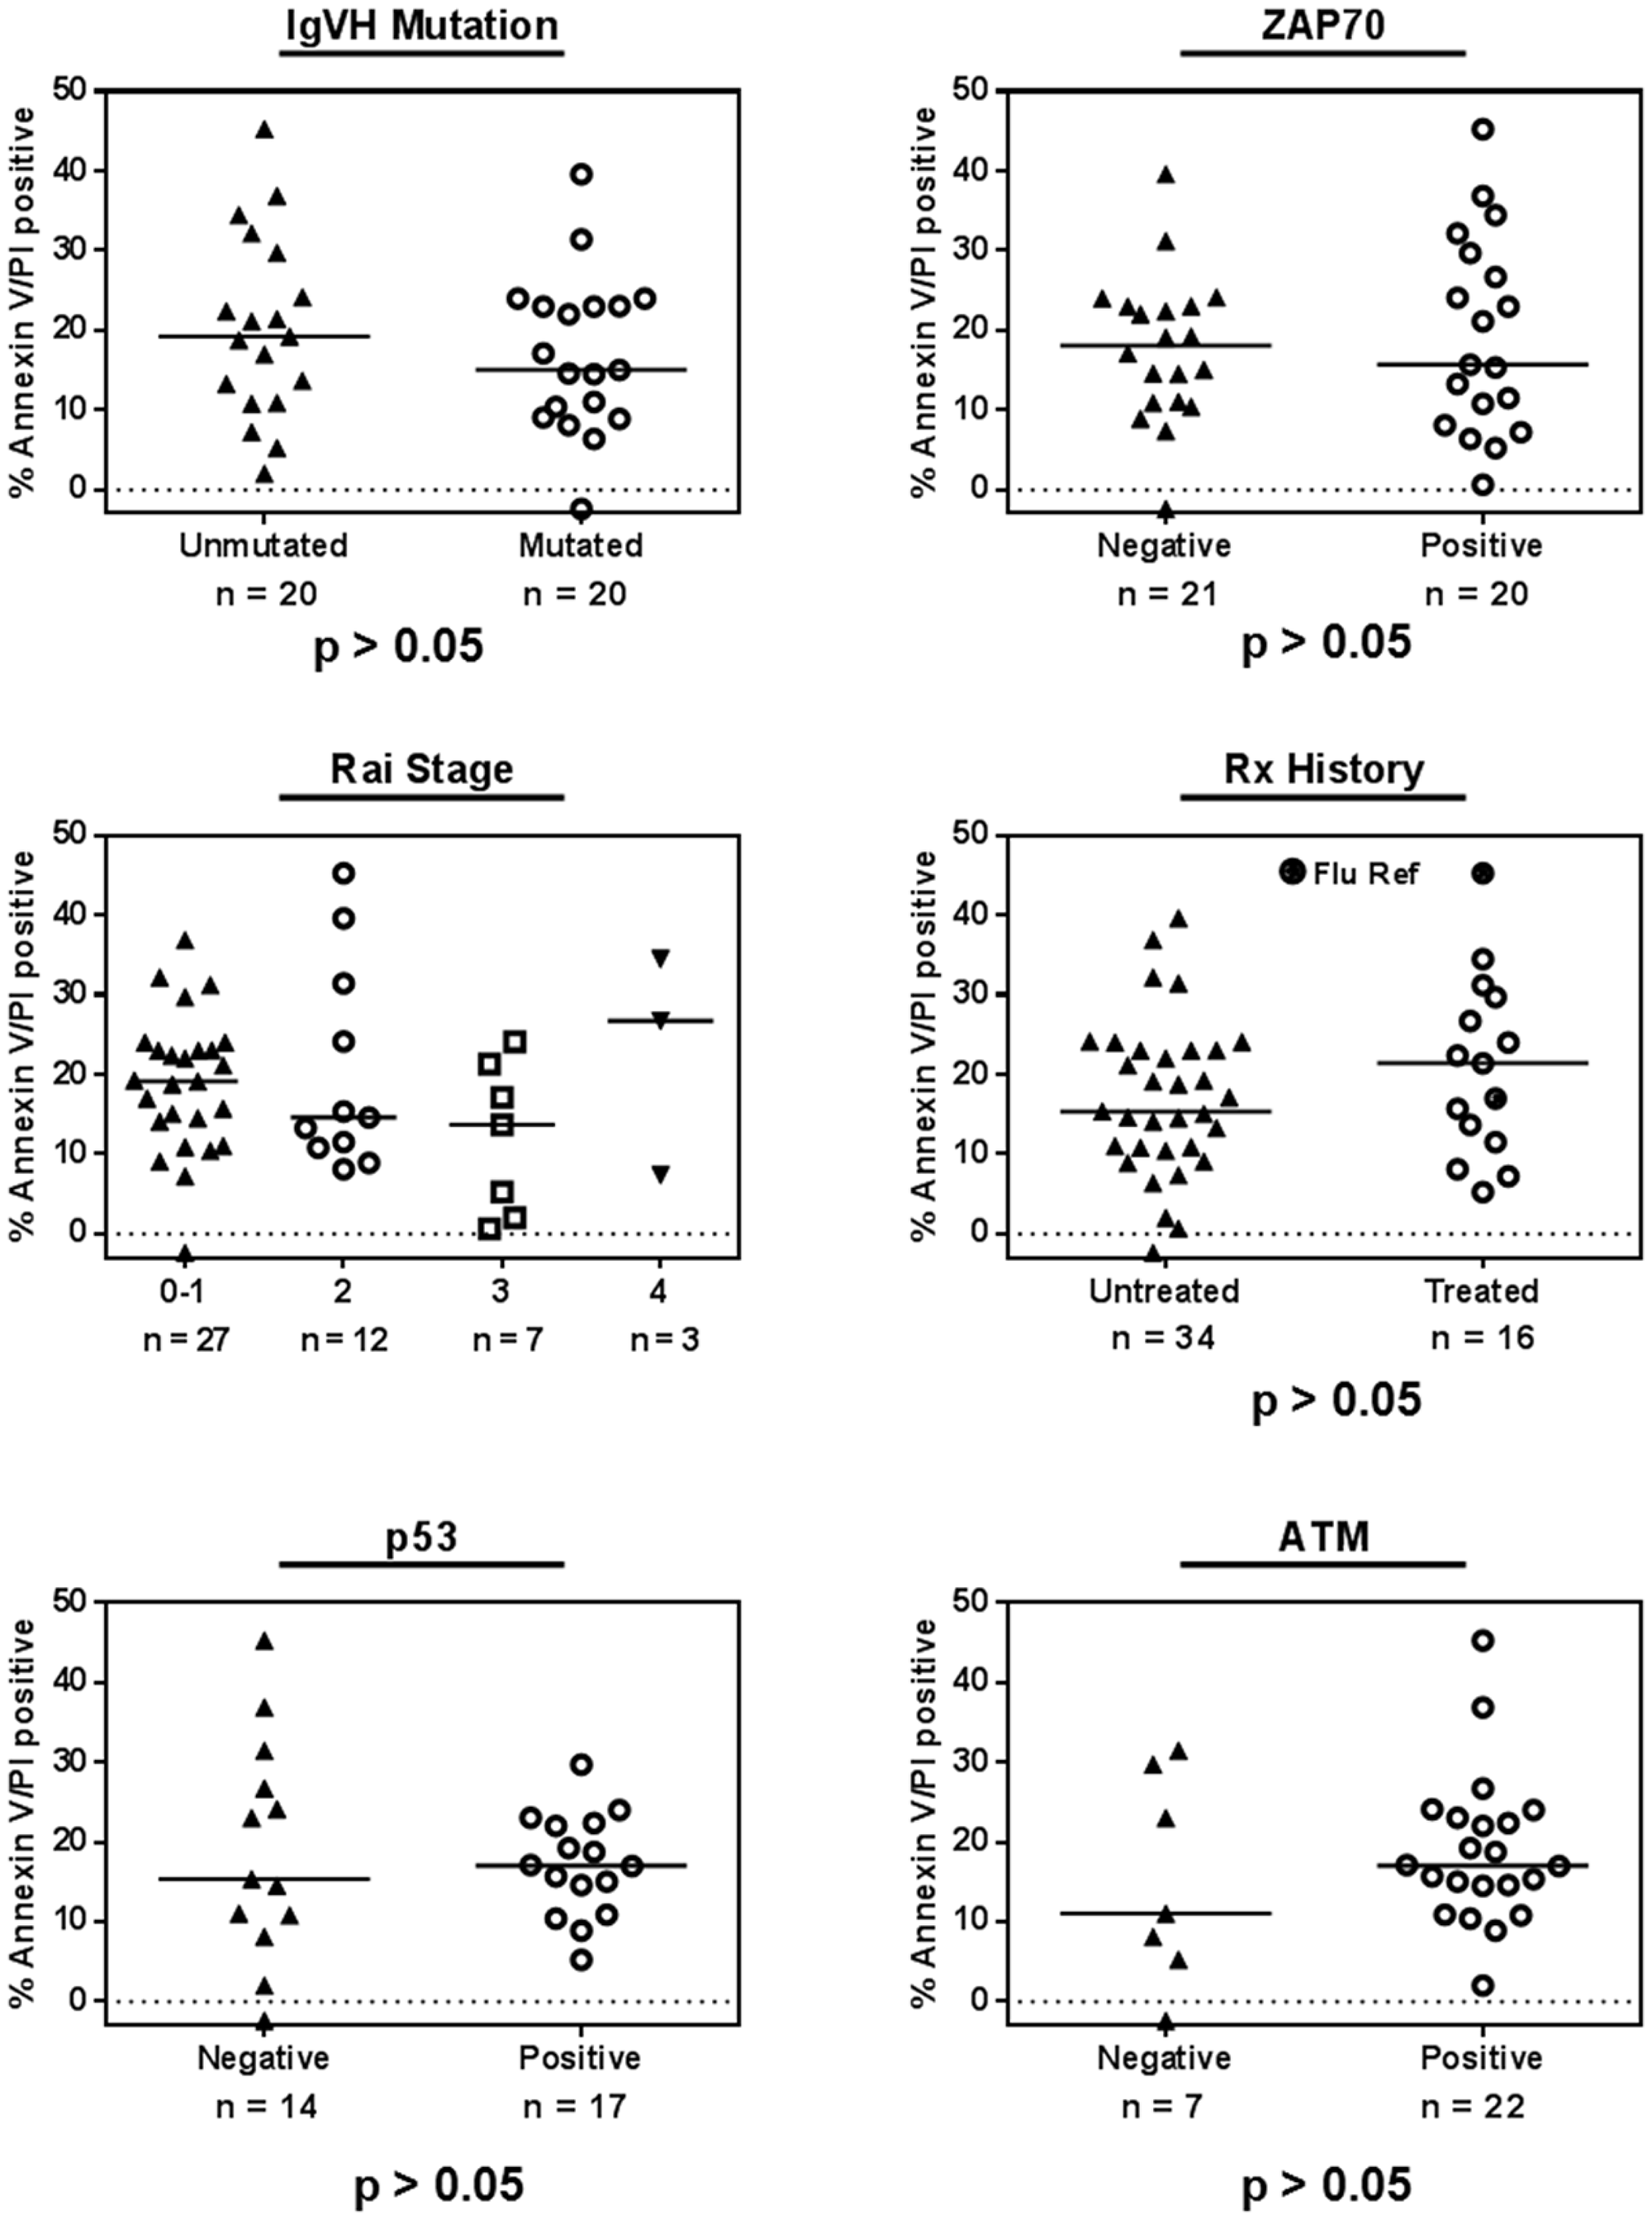 AZD1208-induced cell death and impact of chronic lymphocytic leukemia (CLL) prognostic markers.